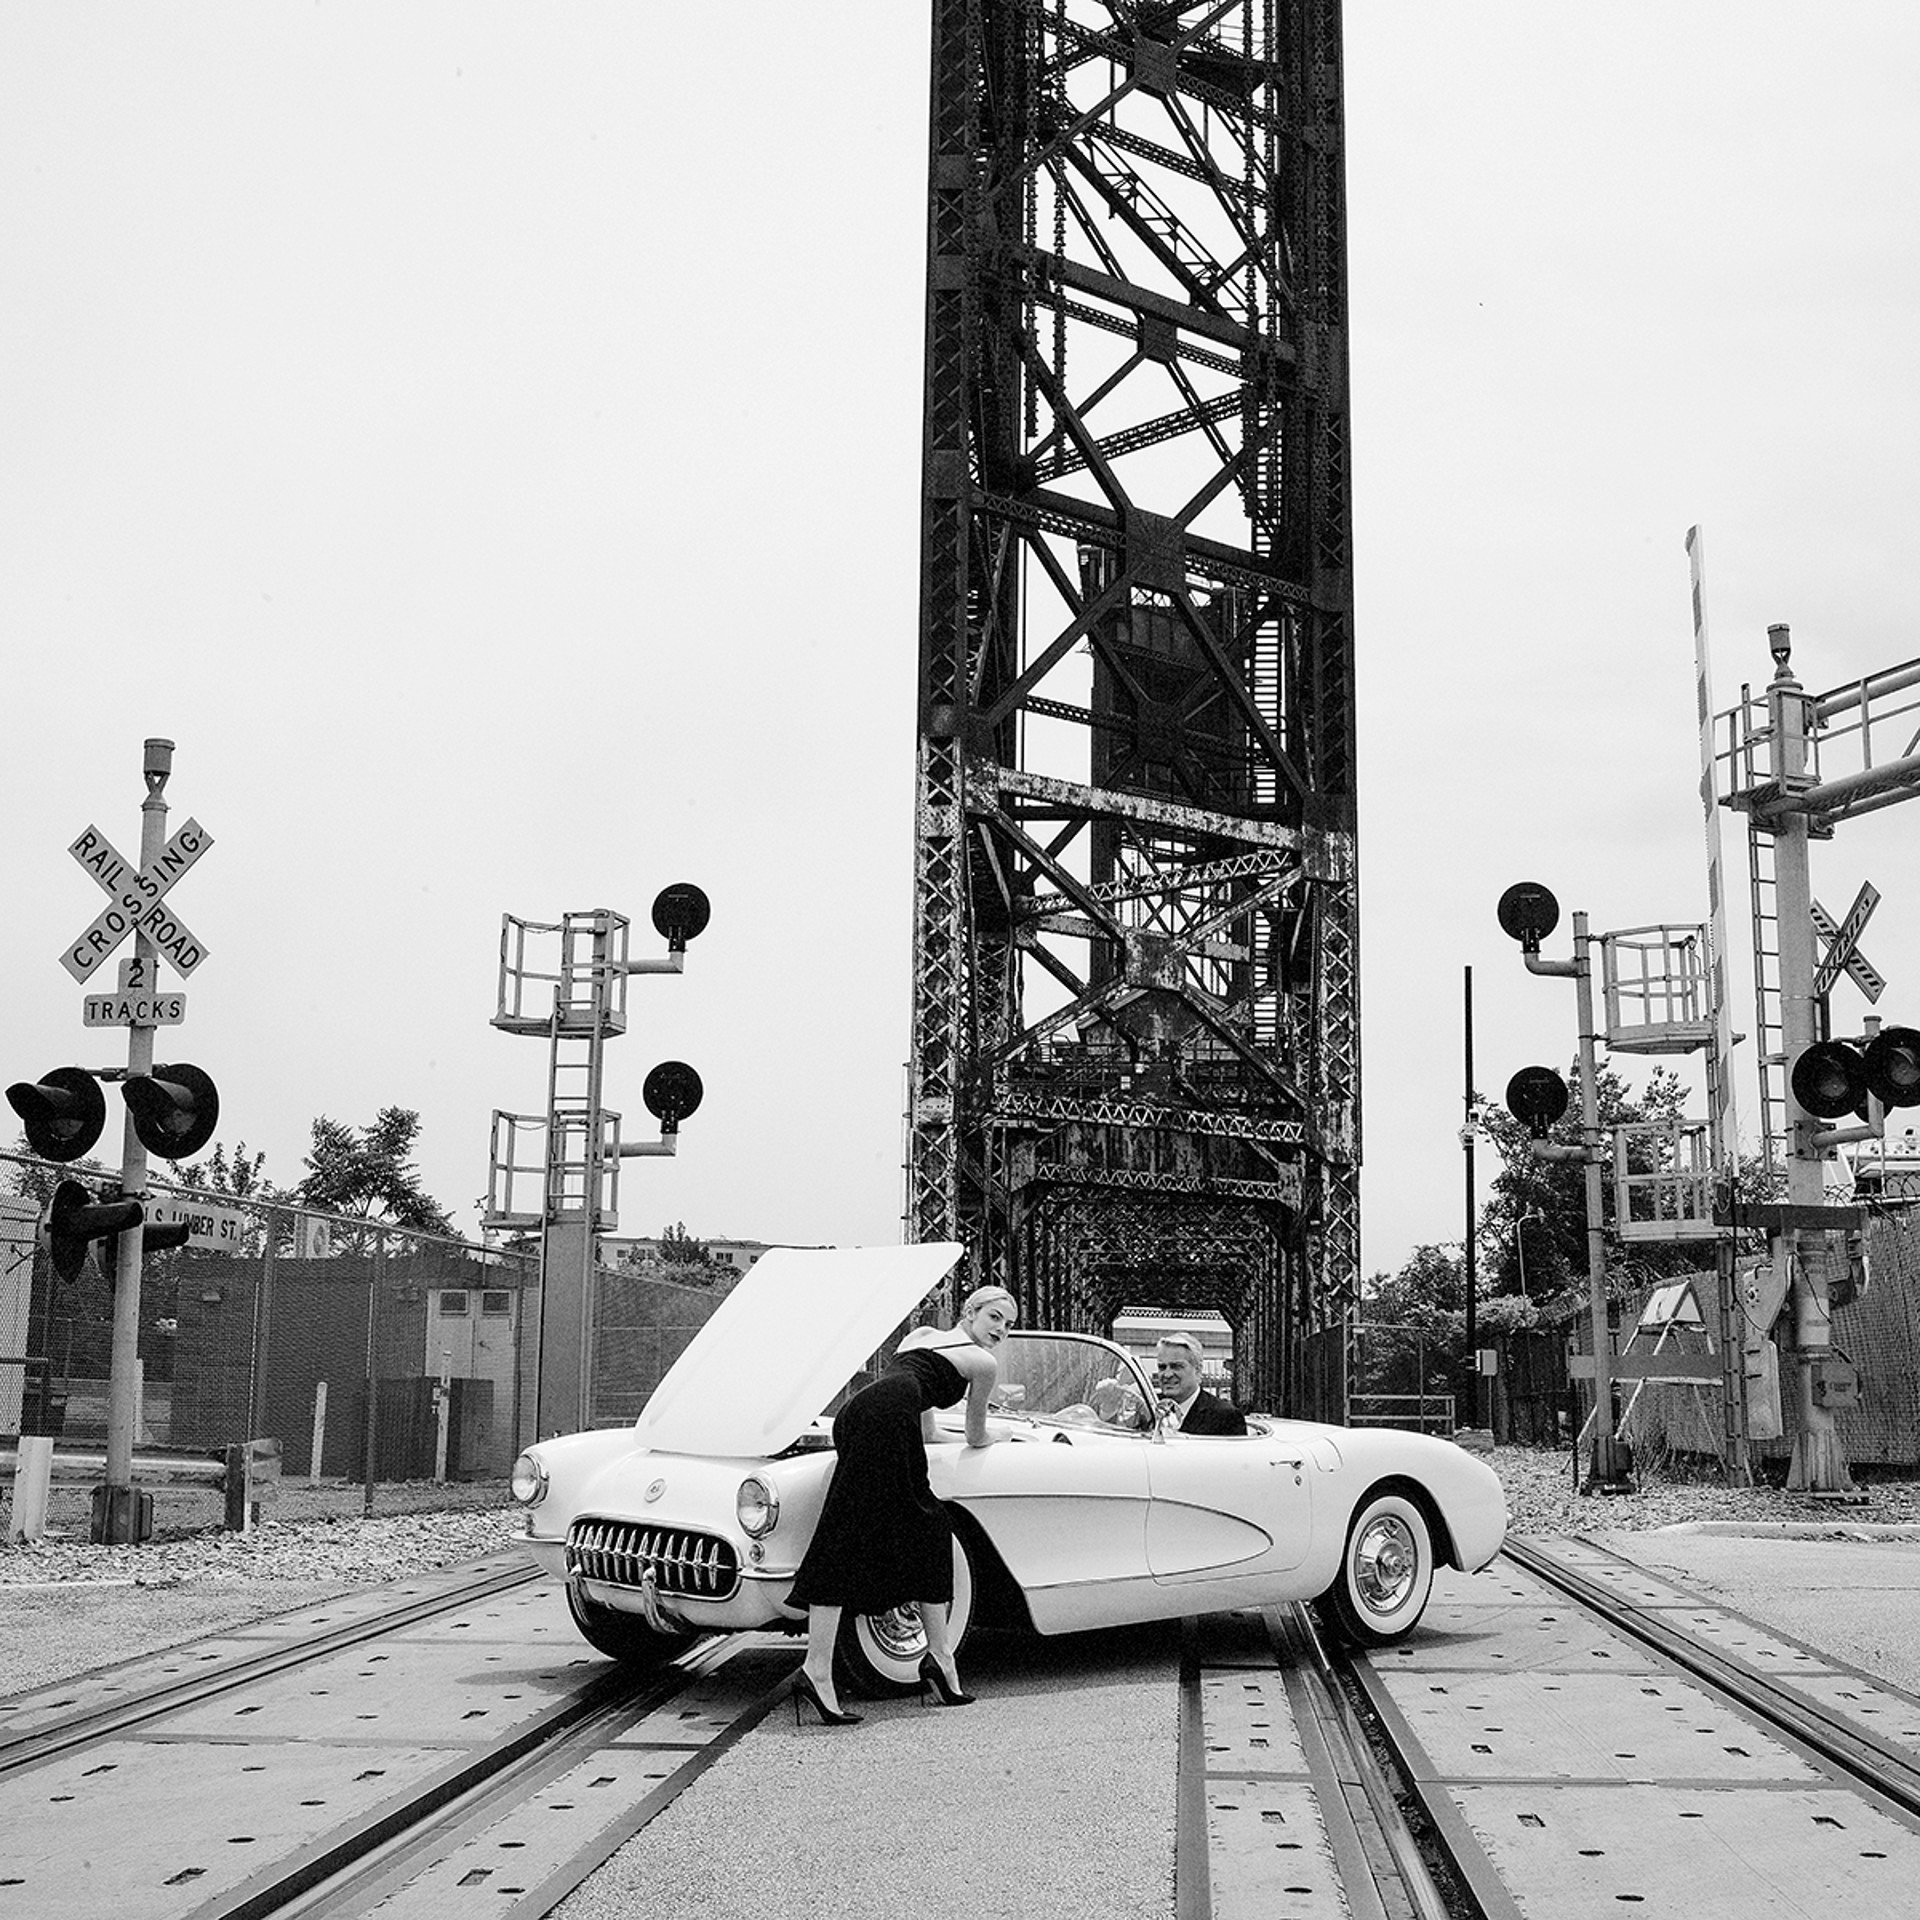 Girl on the Tracks by Tyler Shields